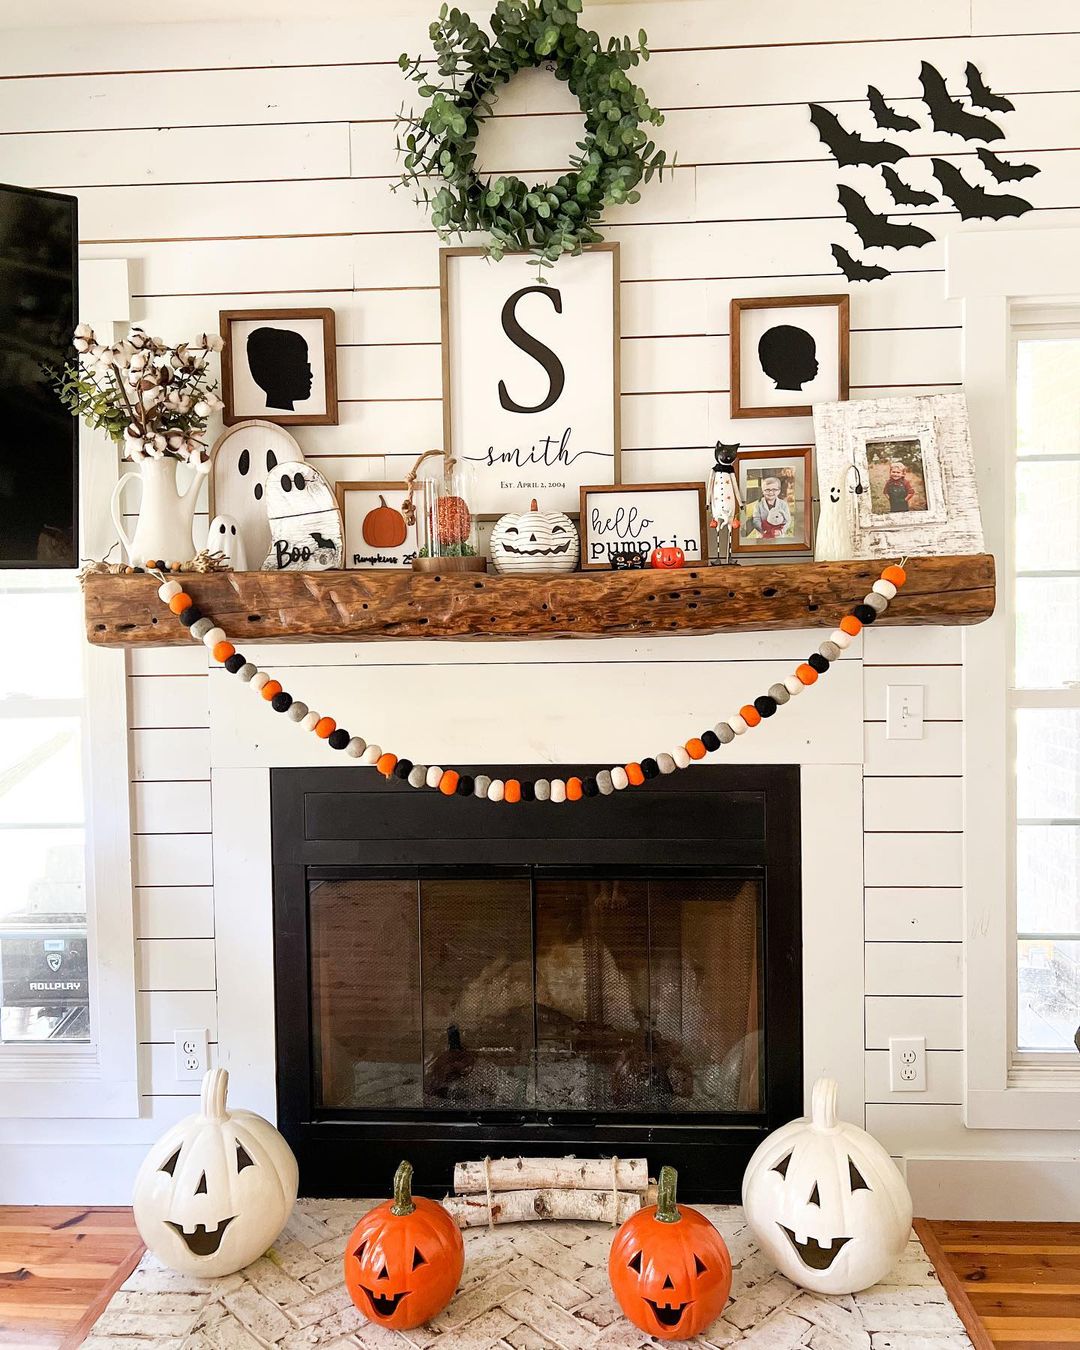 Festive Halloween Mantel with Personalized Decor